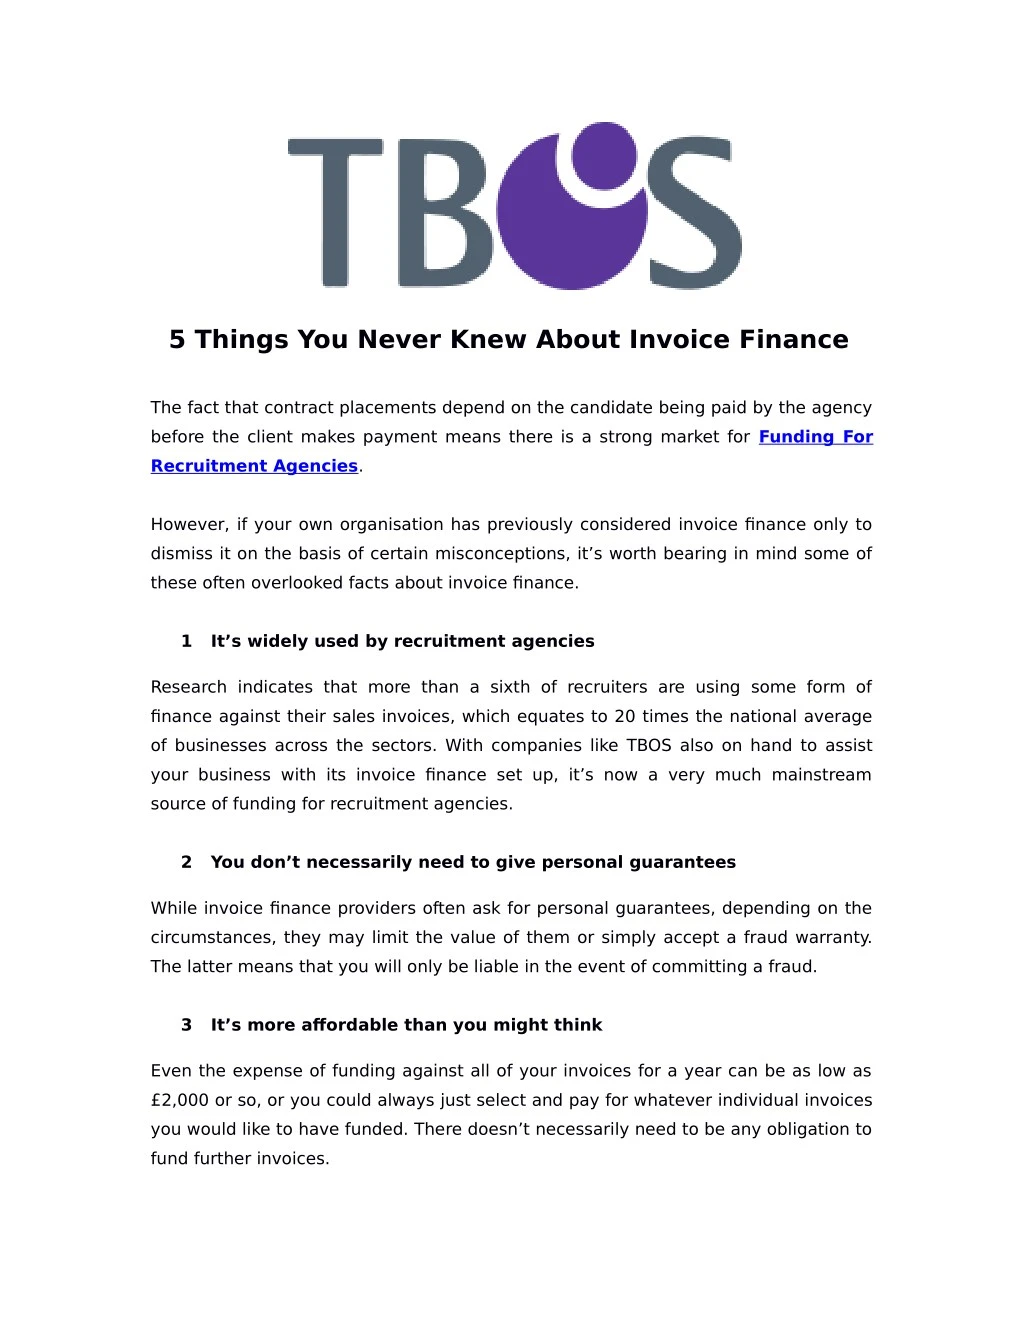 5 things you never knew about invoice finance